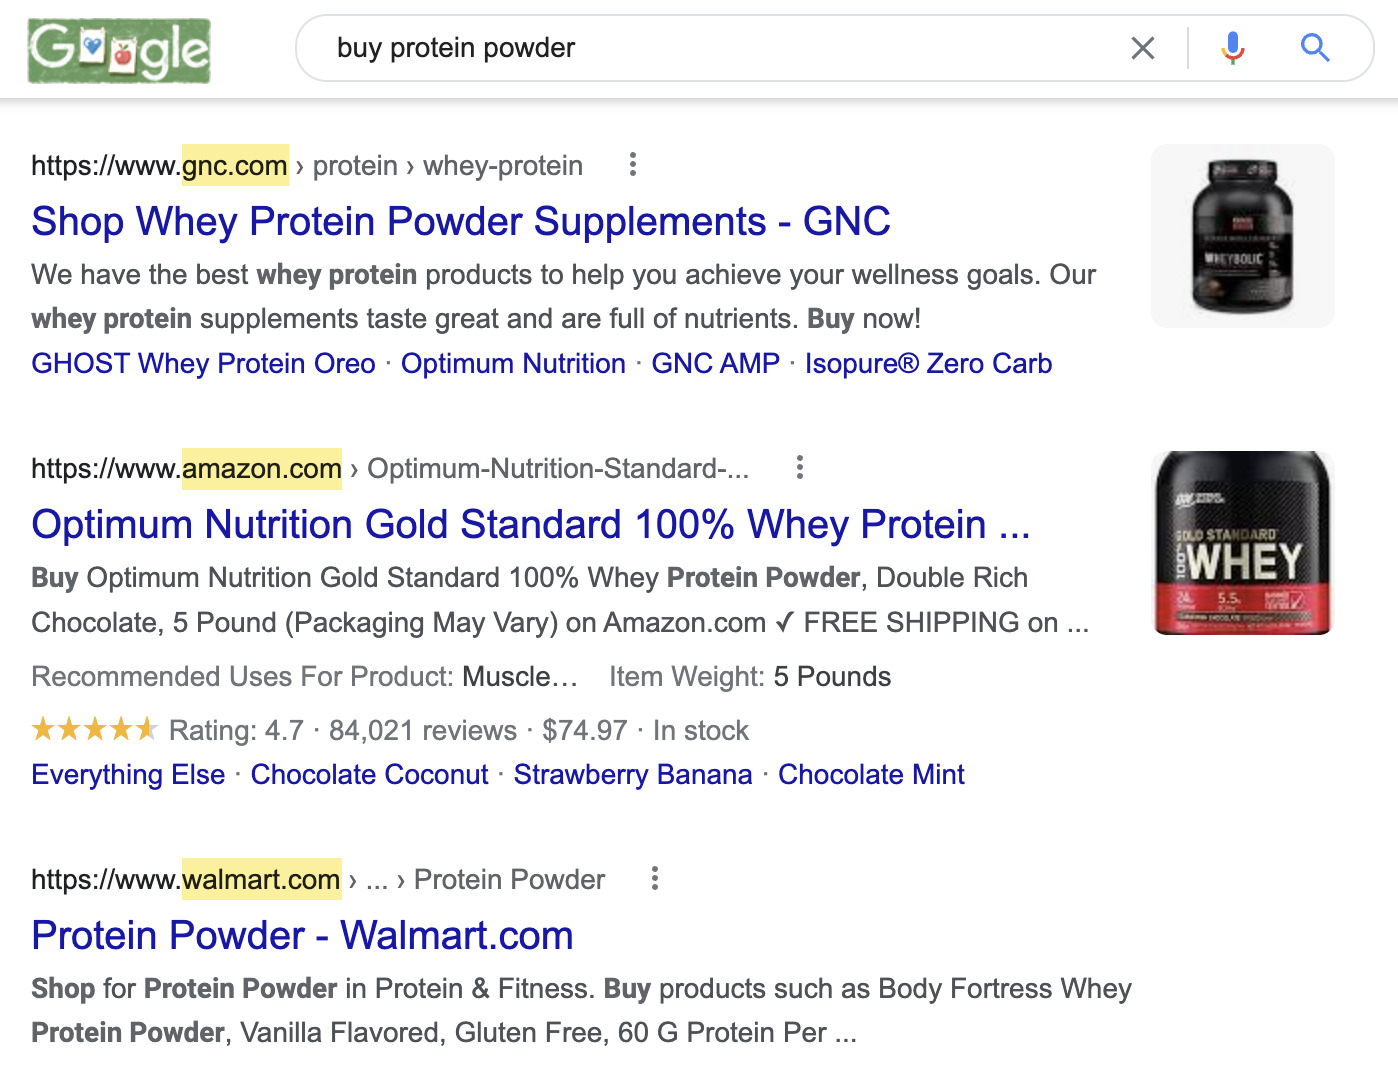 Big brands ranking for "buy protein powder"